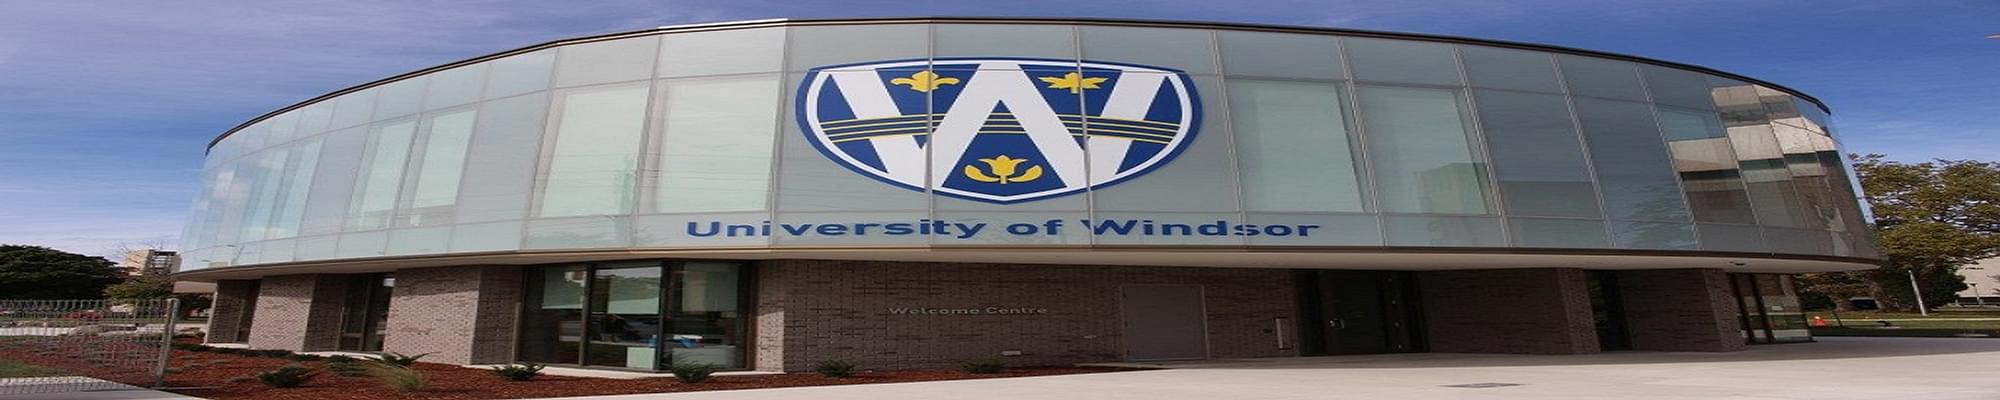 M.Mgmt Logistic an Supply Chain Management at University Of Windsor  [UWINDSOR], Windsor Fees, Entry Requirement & Application Deadline